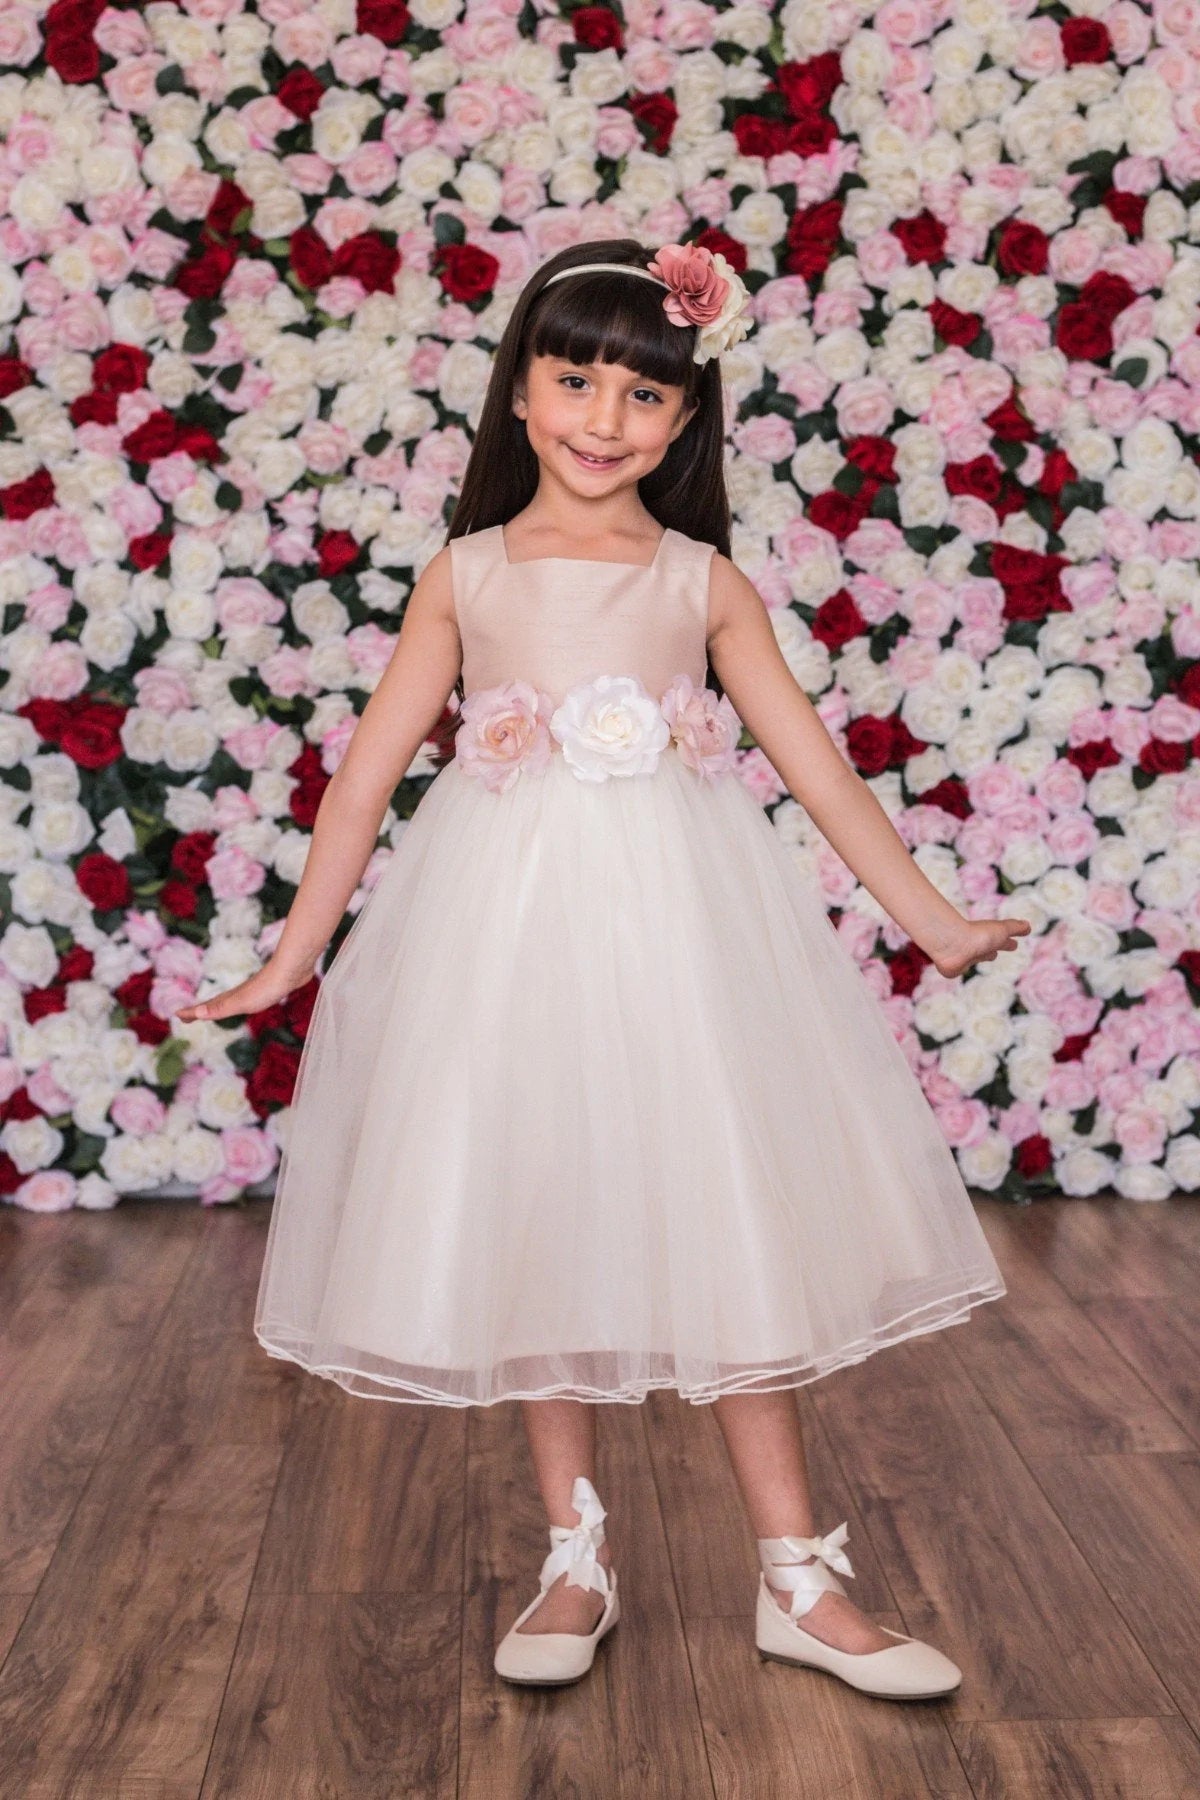 Buy Flower Girl Dress Kids Lace Applique Pageant Ball Gown Prom Dresses  Picture Color 1 Size 10 at Amazon.in